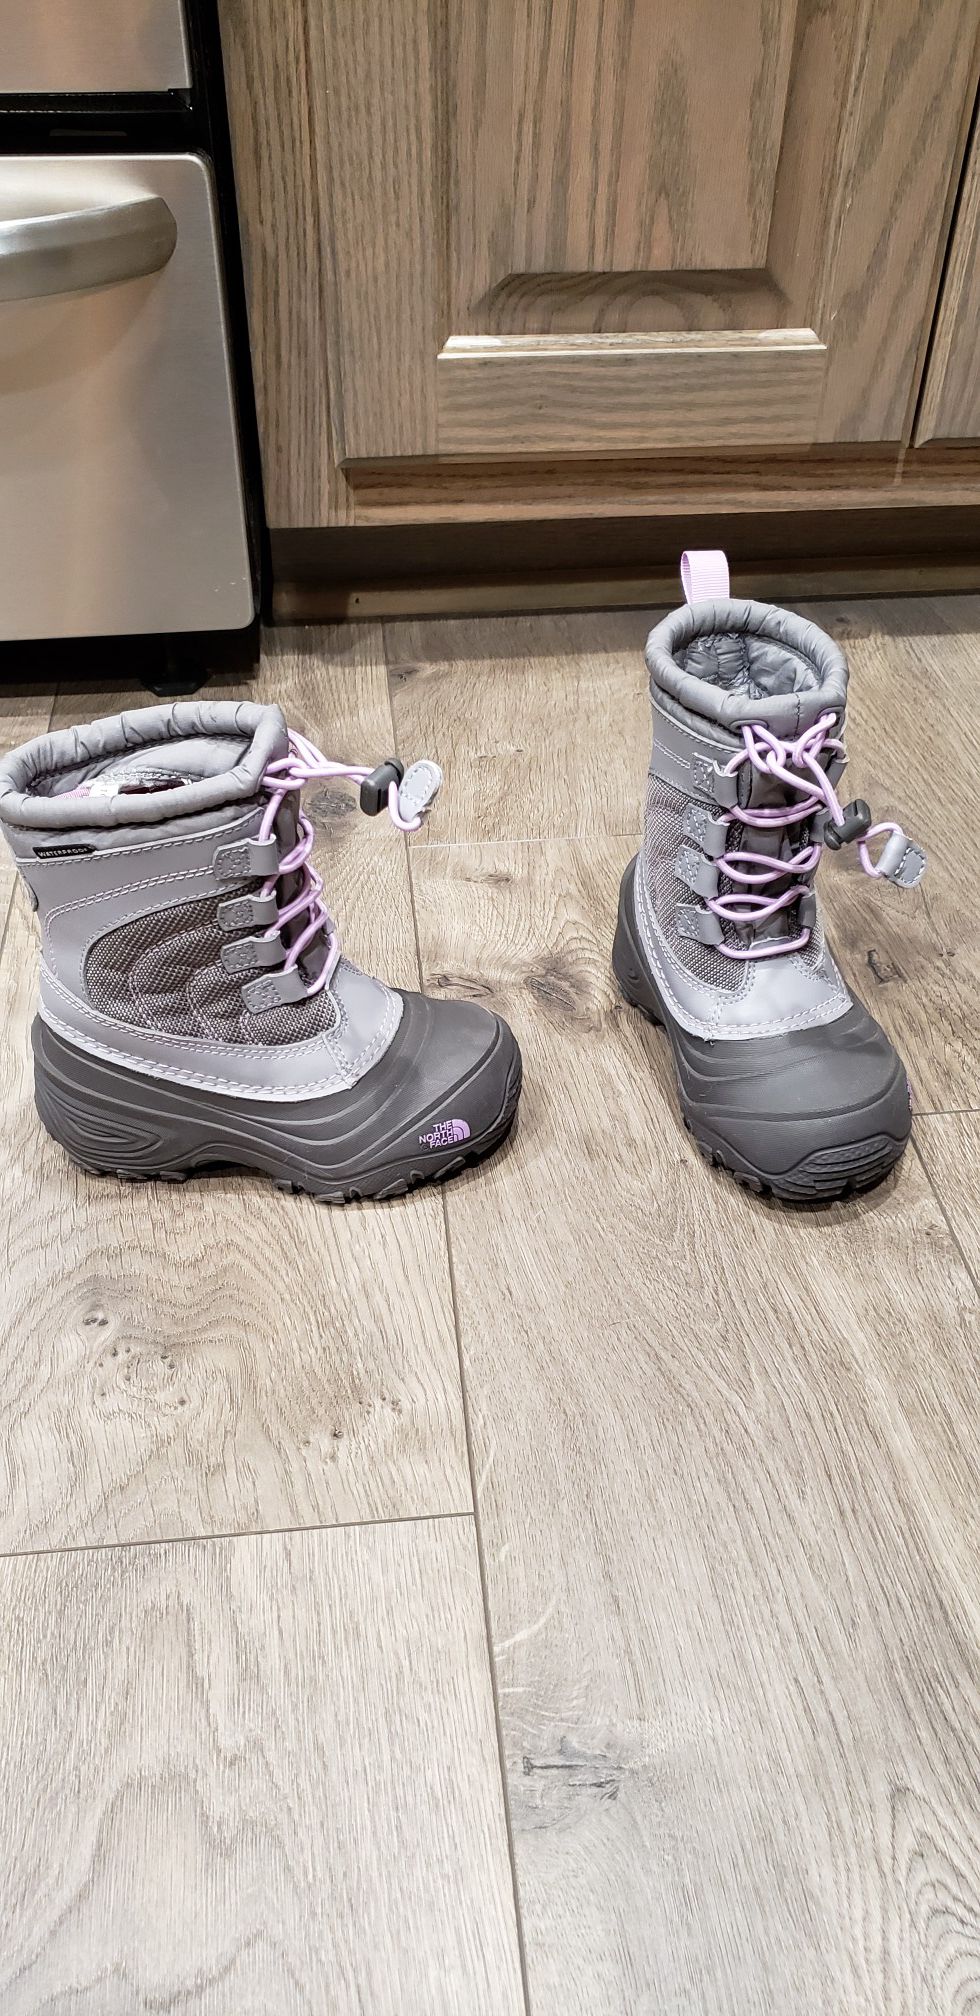 Toddler Girls North Face snow boot